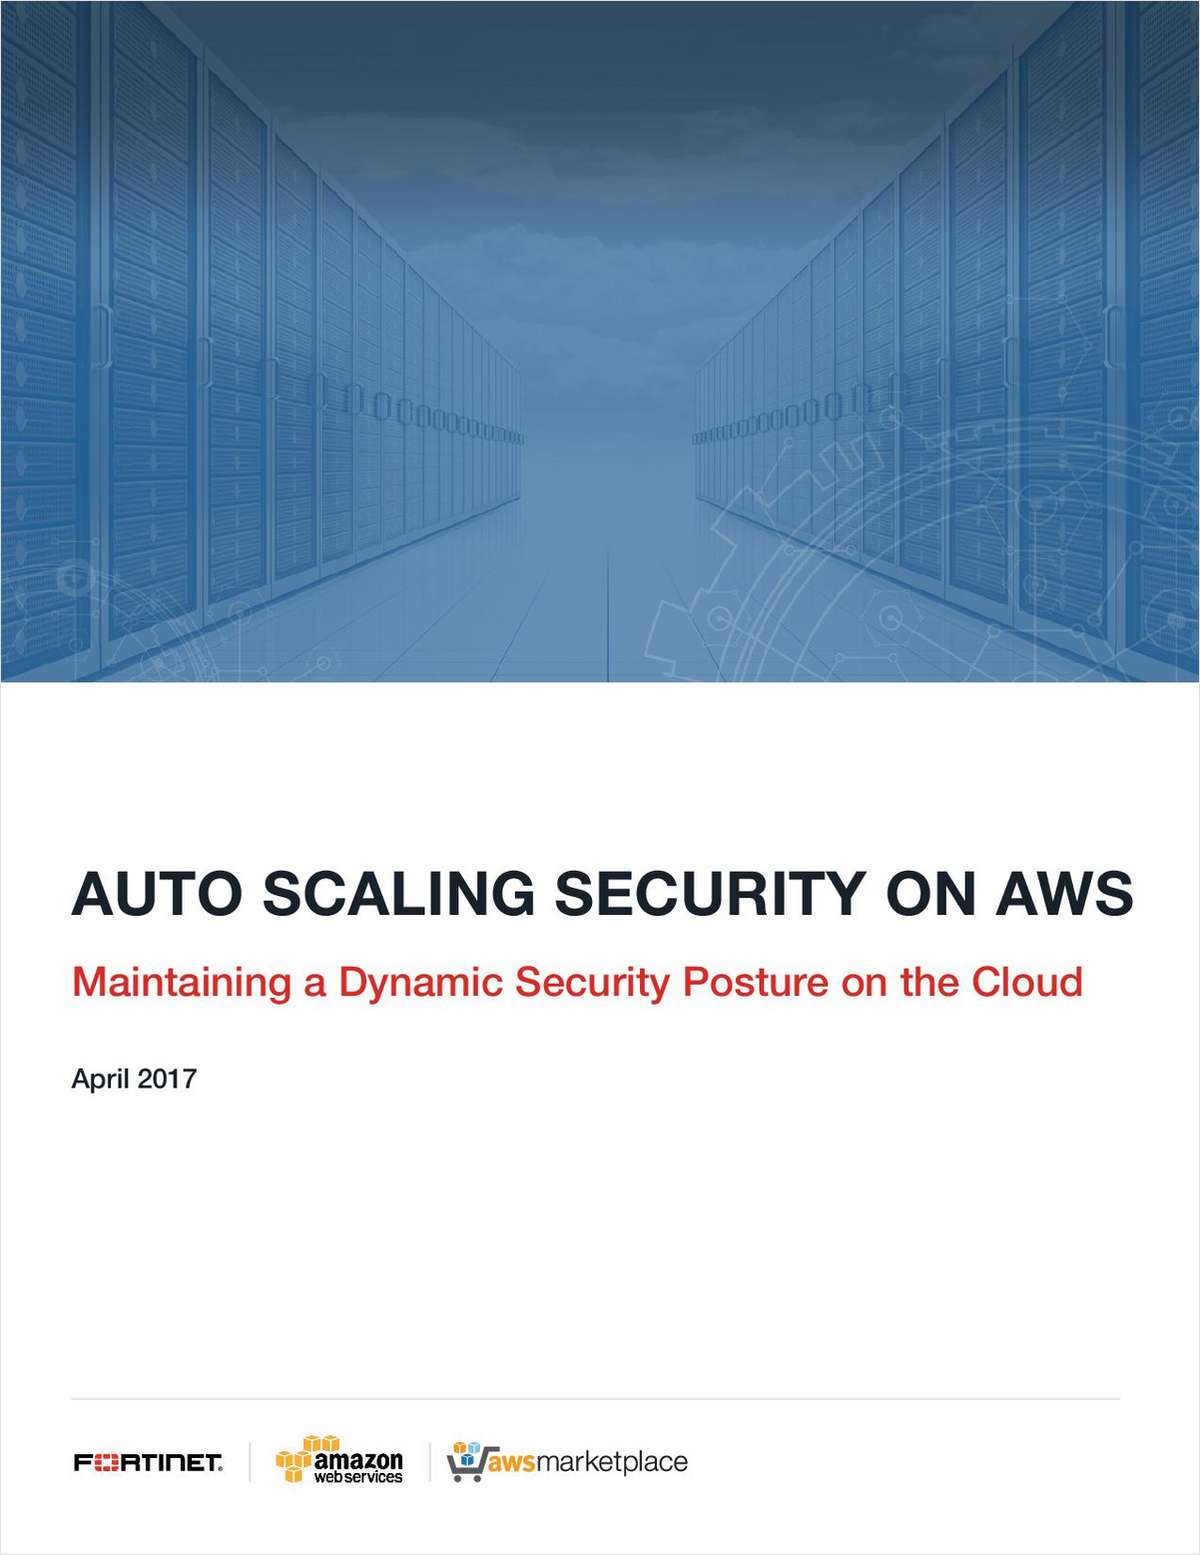 Auto Scaling Security on AWS